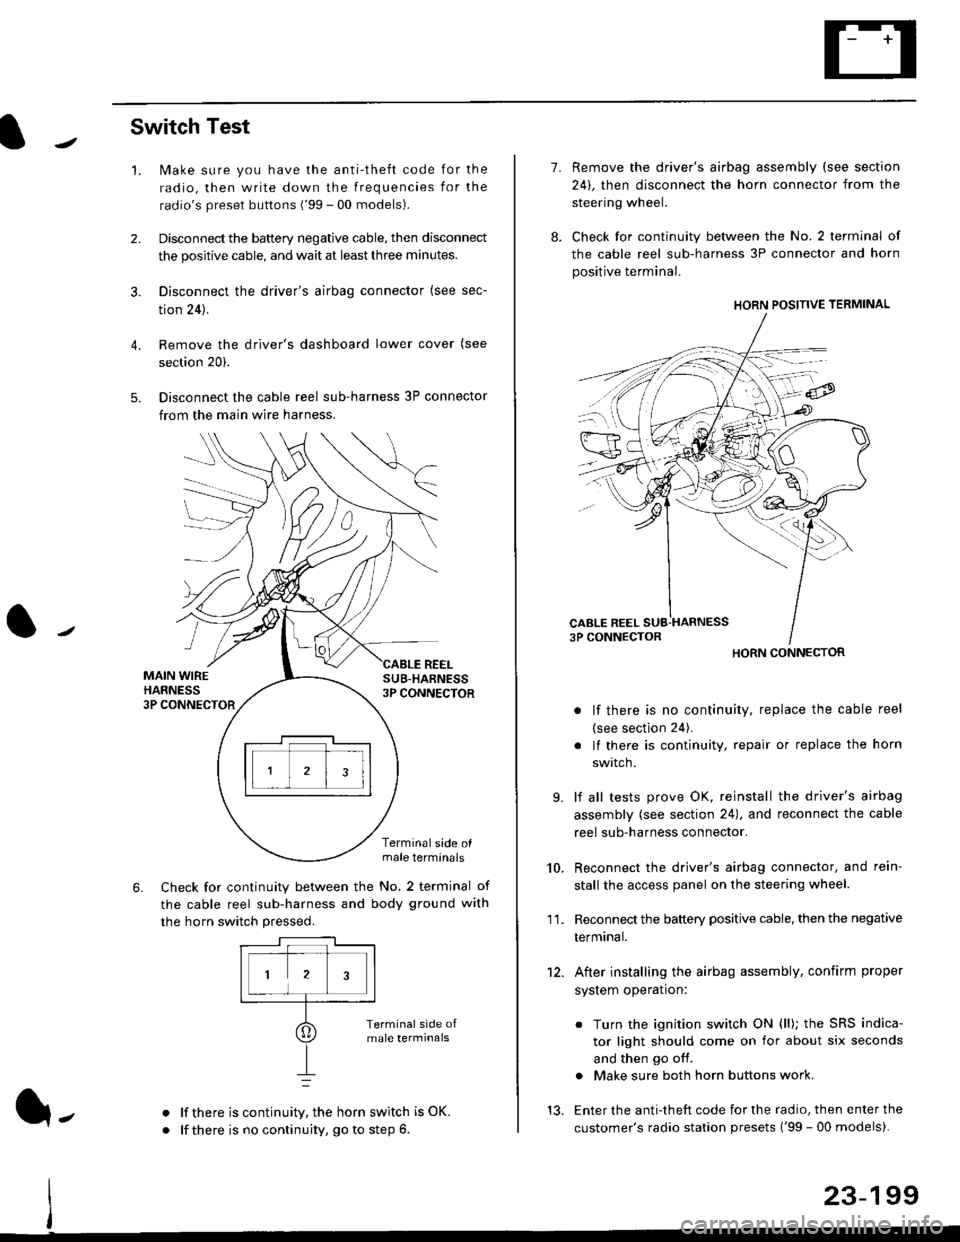 HONDA CIVIC 1996 6.G User Guide Switch Test
lMake sure you have the anti-theft code for the
radio, then write down the frequencies for the
radios preset buttons (99 - 00 models).
Disconnect the battery negative cable, then disconn